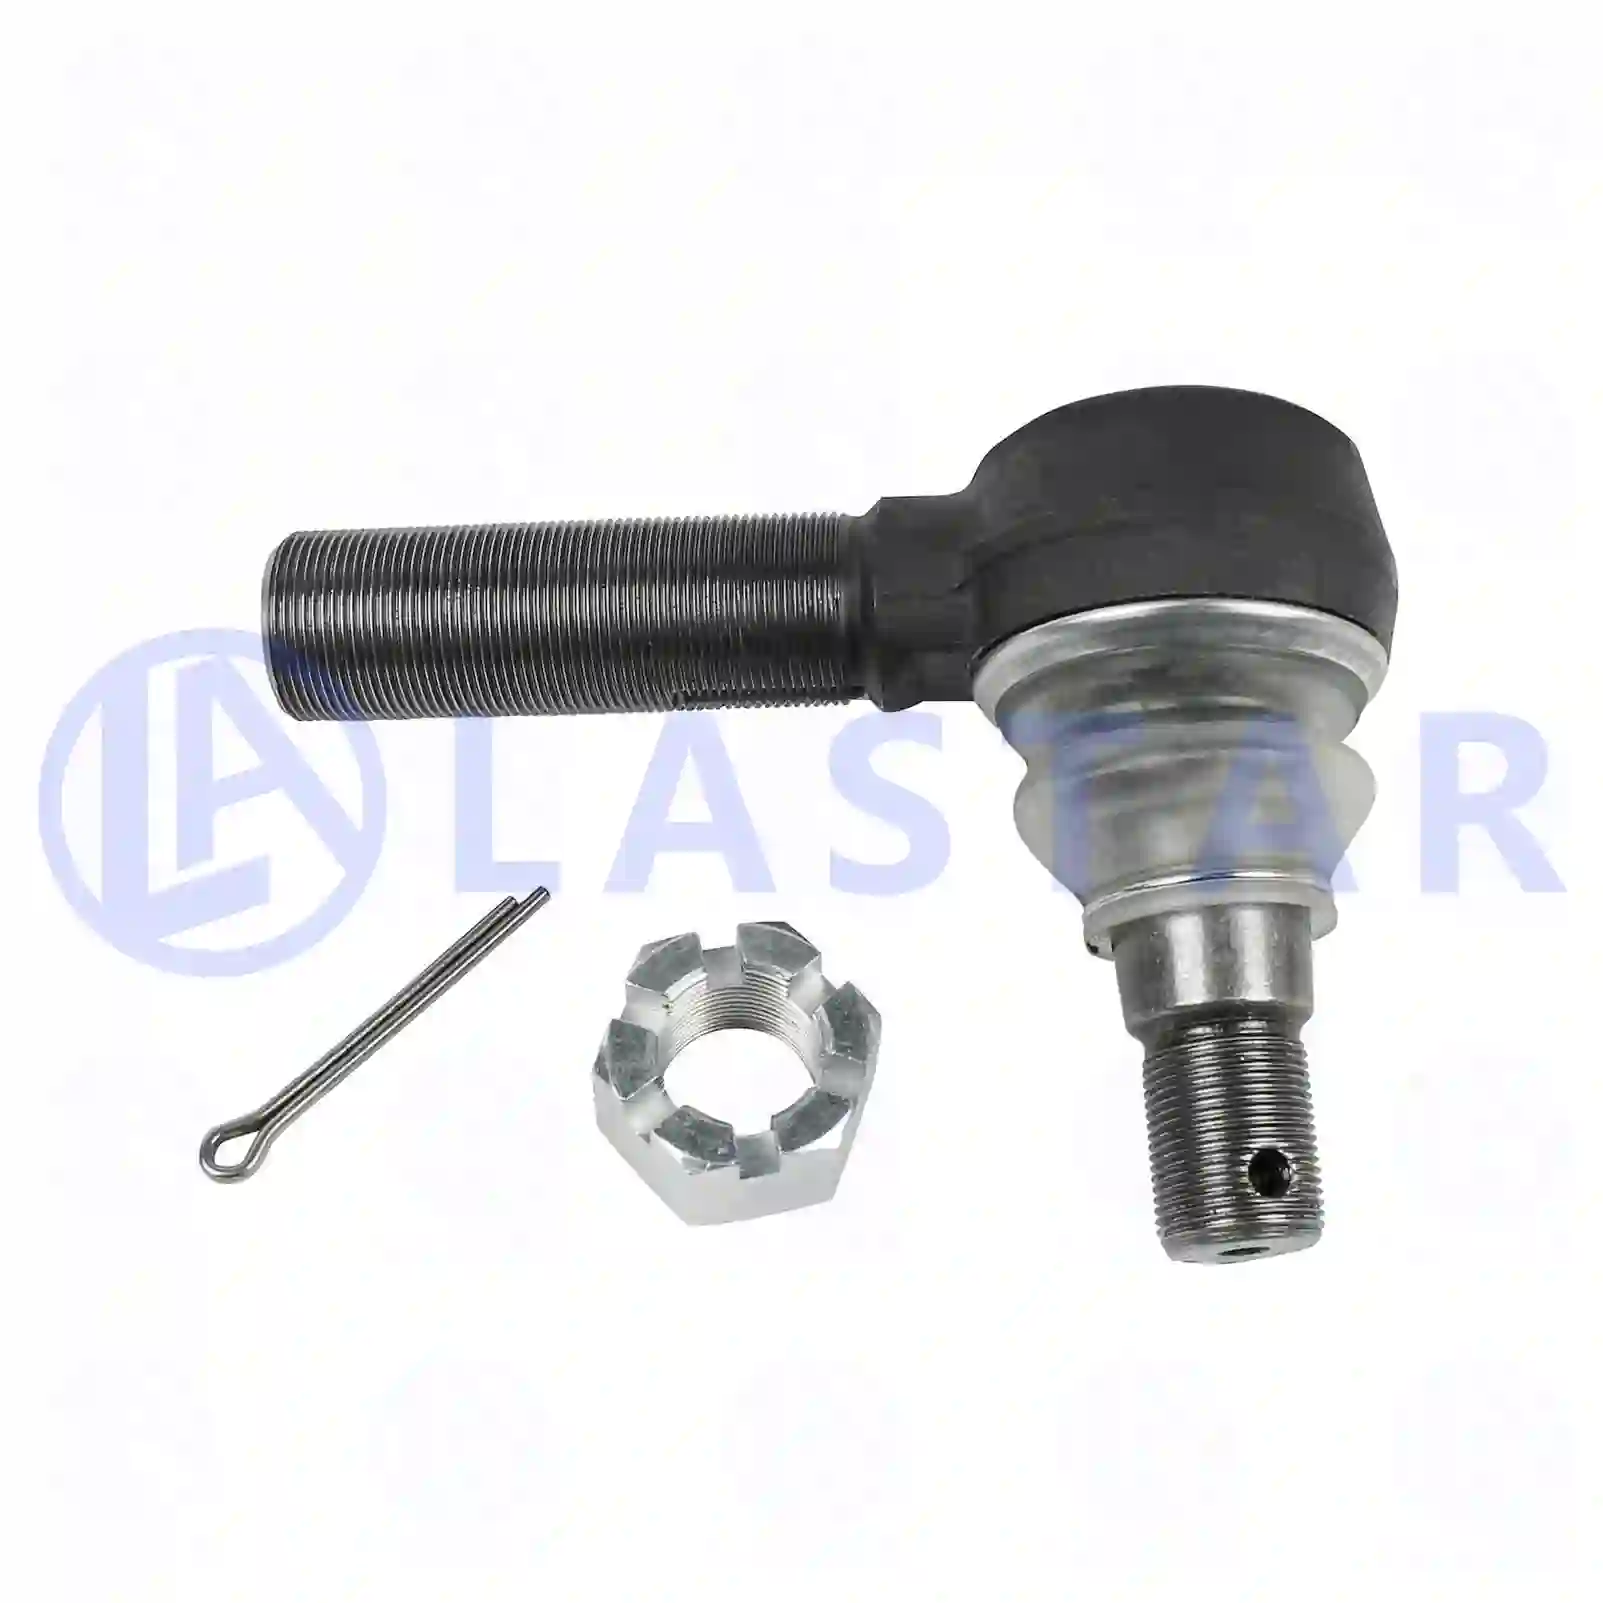 Ball joint, right hand thread, 77705144, 20581089, 21554115, ZG40375-0008, , ||  77705144 Lastar Spare Part | Truck Spare Parts, Auotomotive Spare Parts Ball joint, right hand thread, 77705144, 20581089, 21554115, ZG40375-0008, , ||  77705144 Lastar Spare Part | Truck Spare Parts, Auotomotive Spare Parts